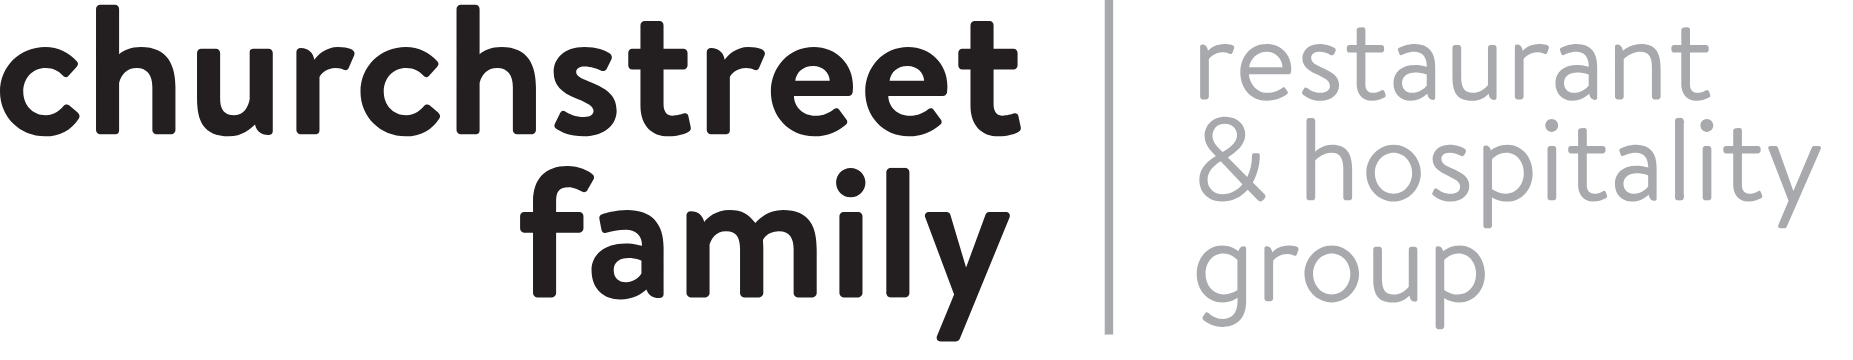 Churchstreet family logo stretched